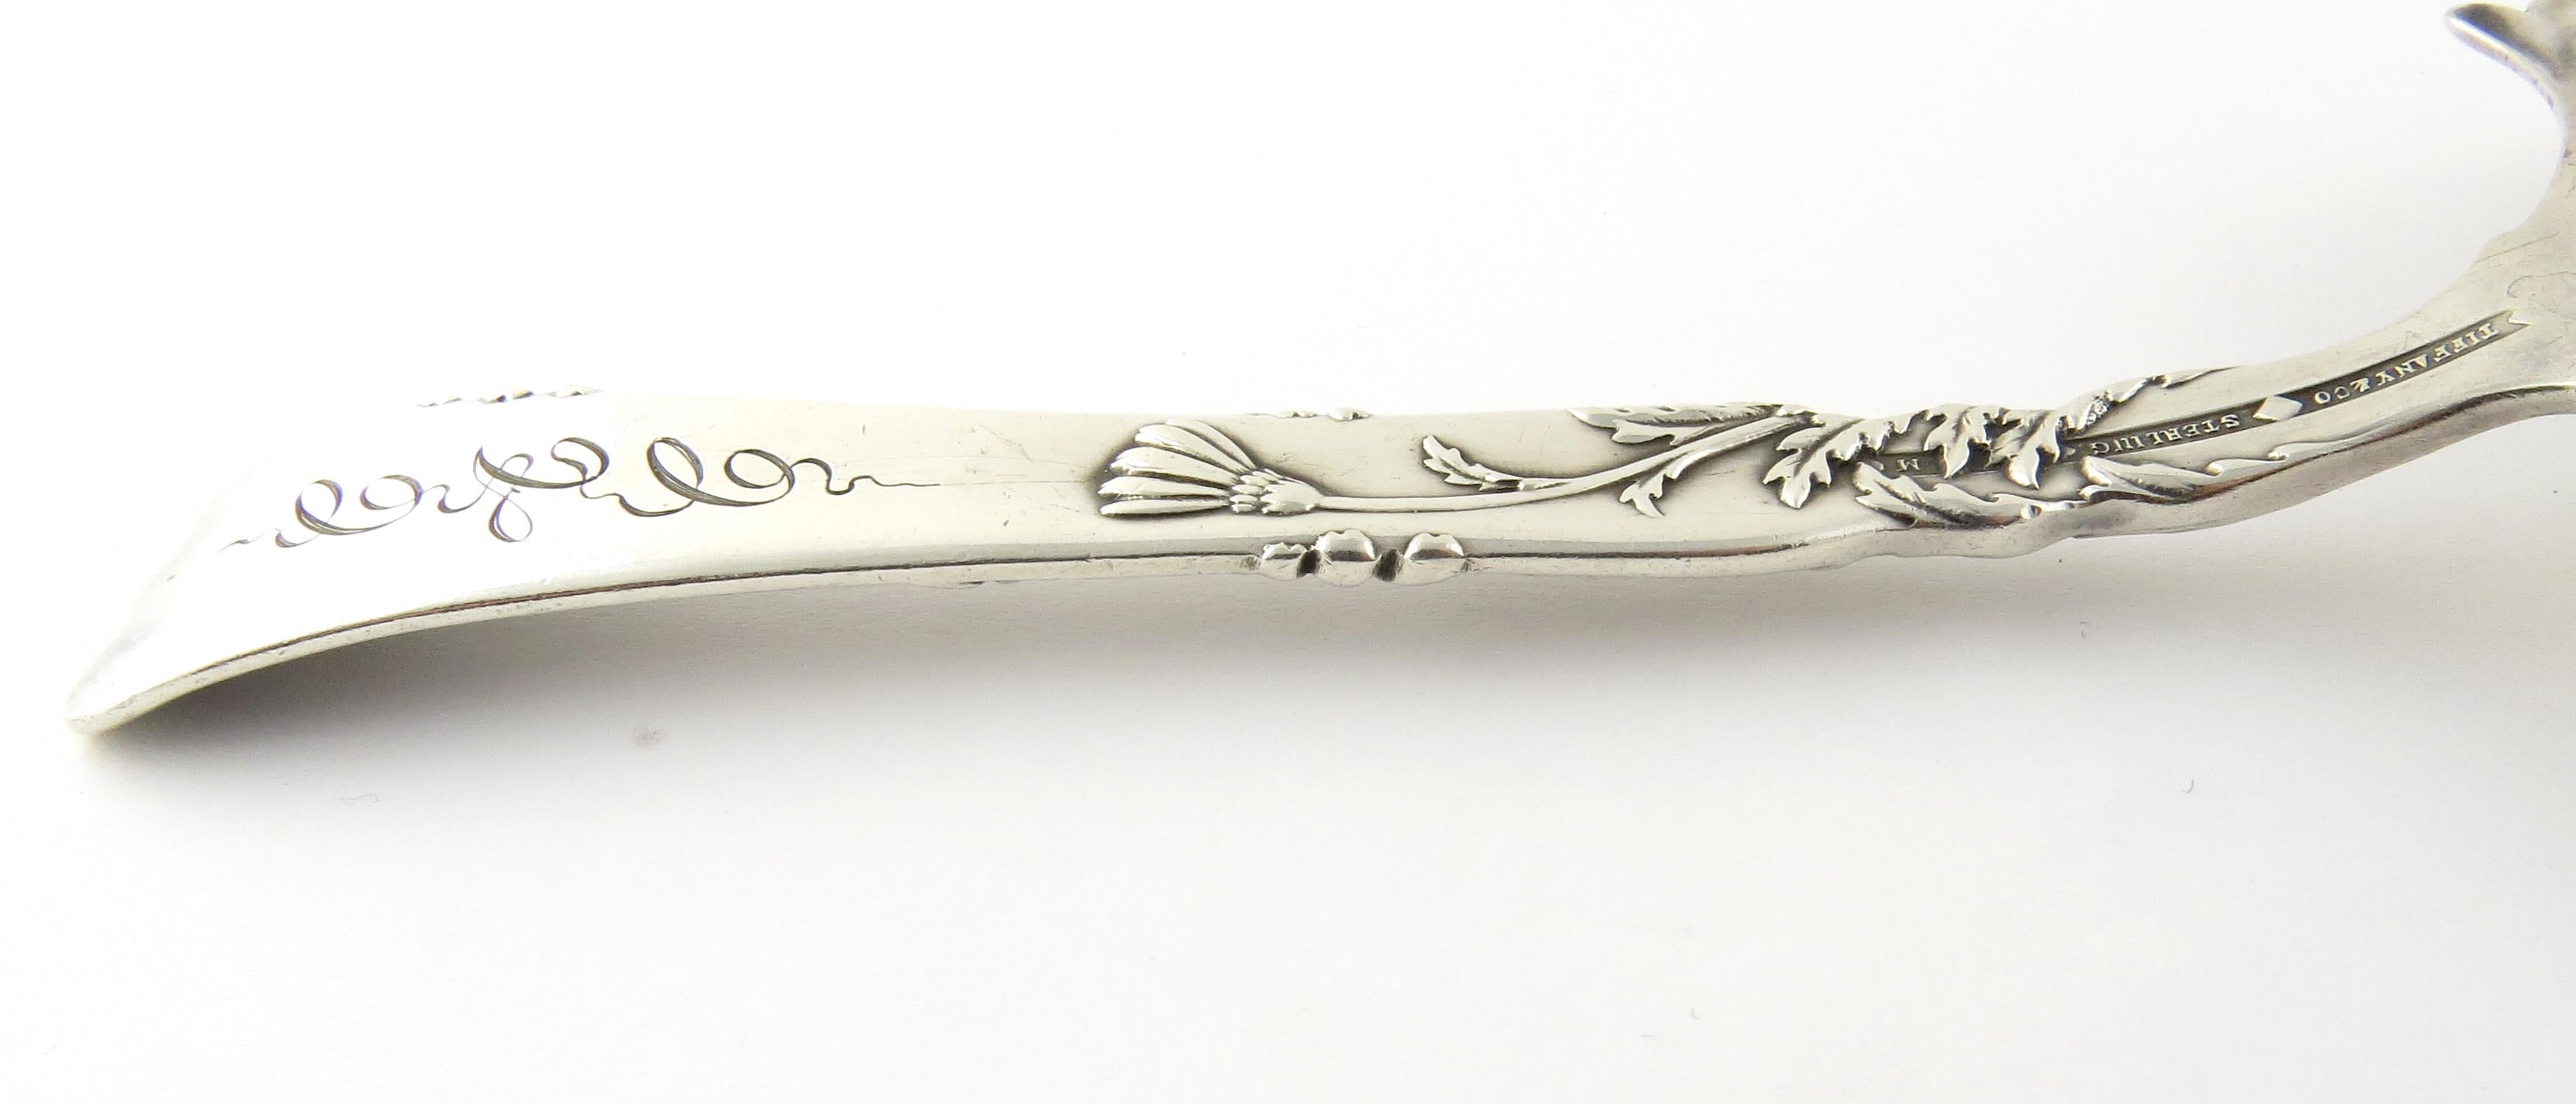 Tiffany & Co. Sterling Silver 1872 Vine Pattern Tomato Server with Daisies 2